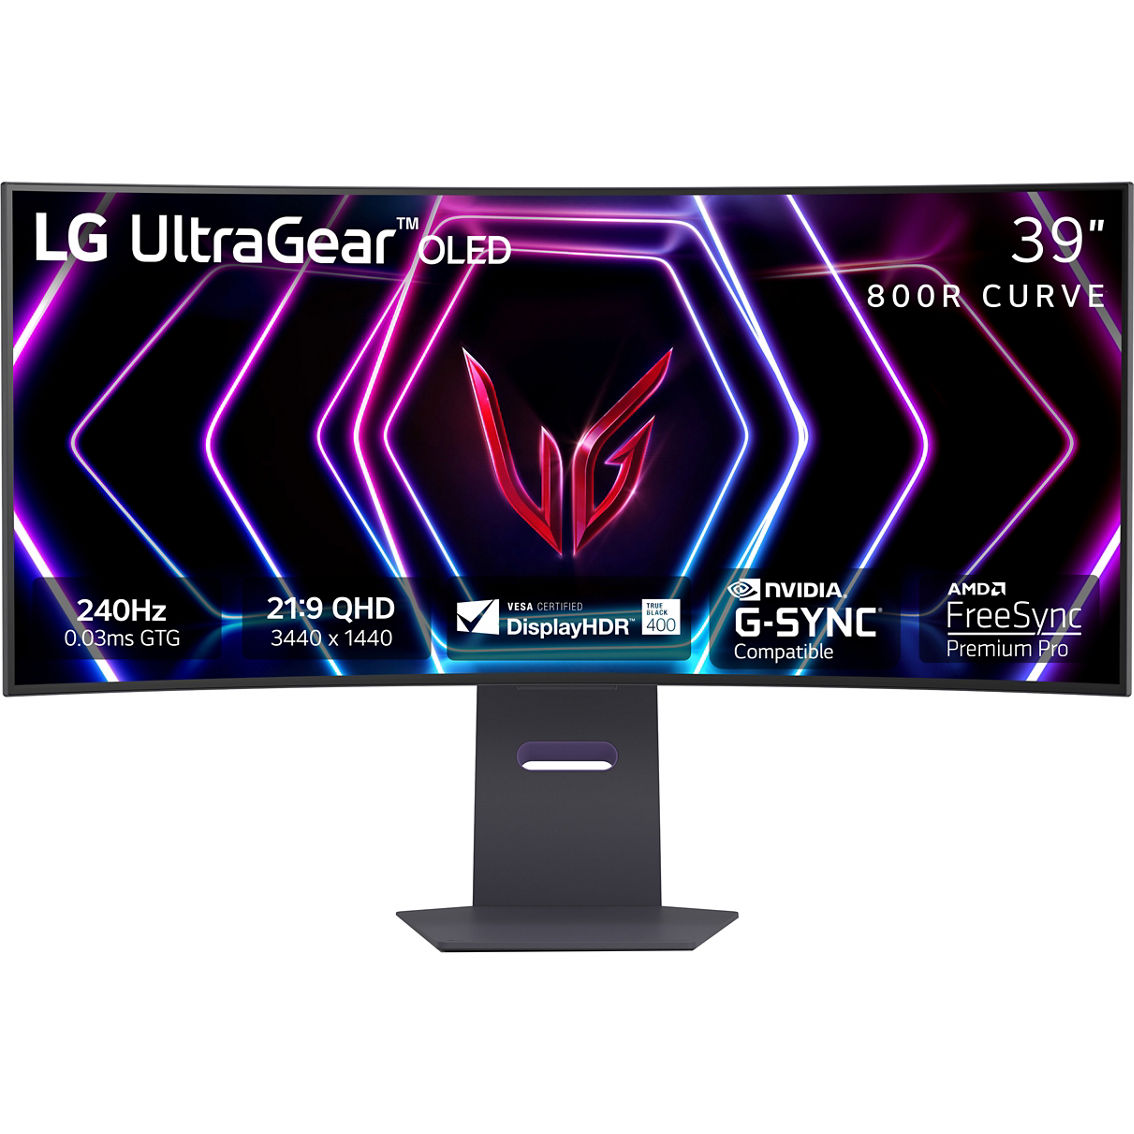 LG 39 in. UltraGear OLED Curved 240Hz WQHD Gaming Monitor with G-SYNC 39GS95QE-B - Image 2 of 9